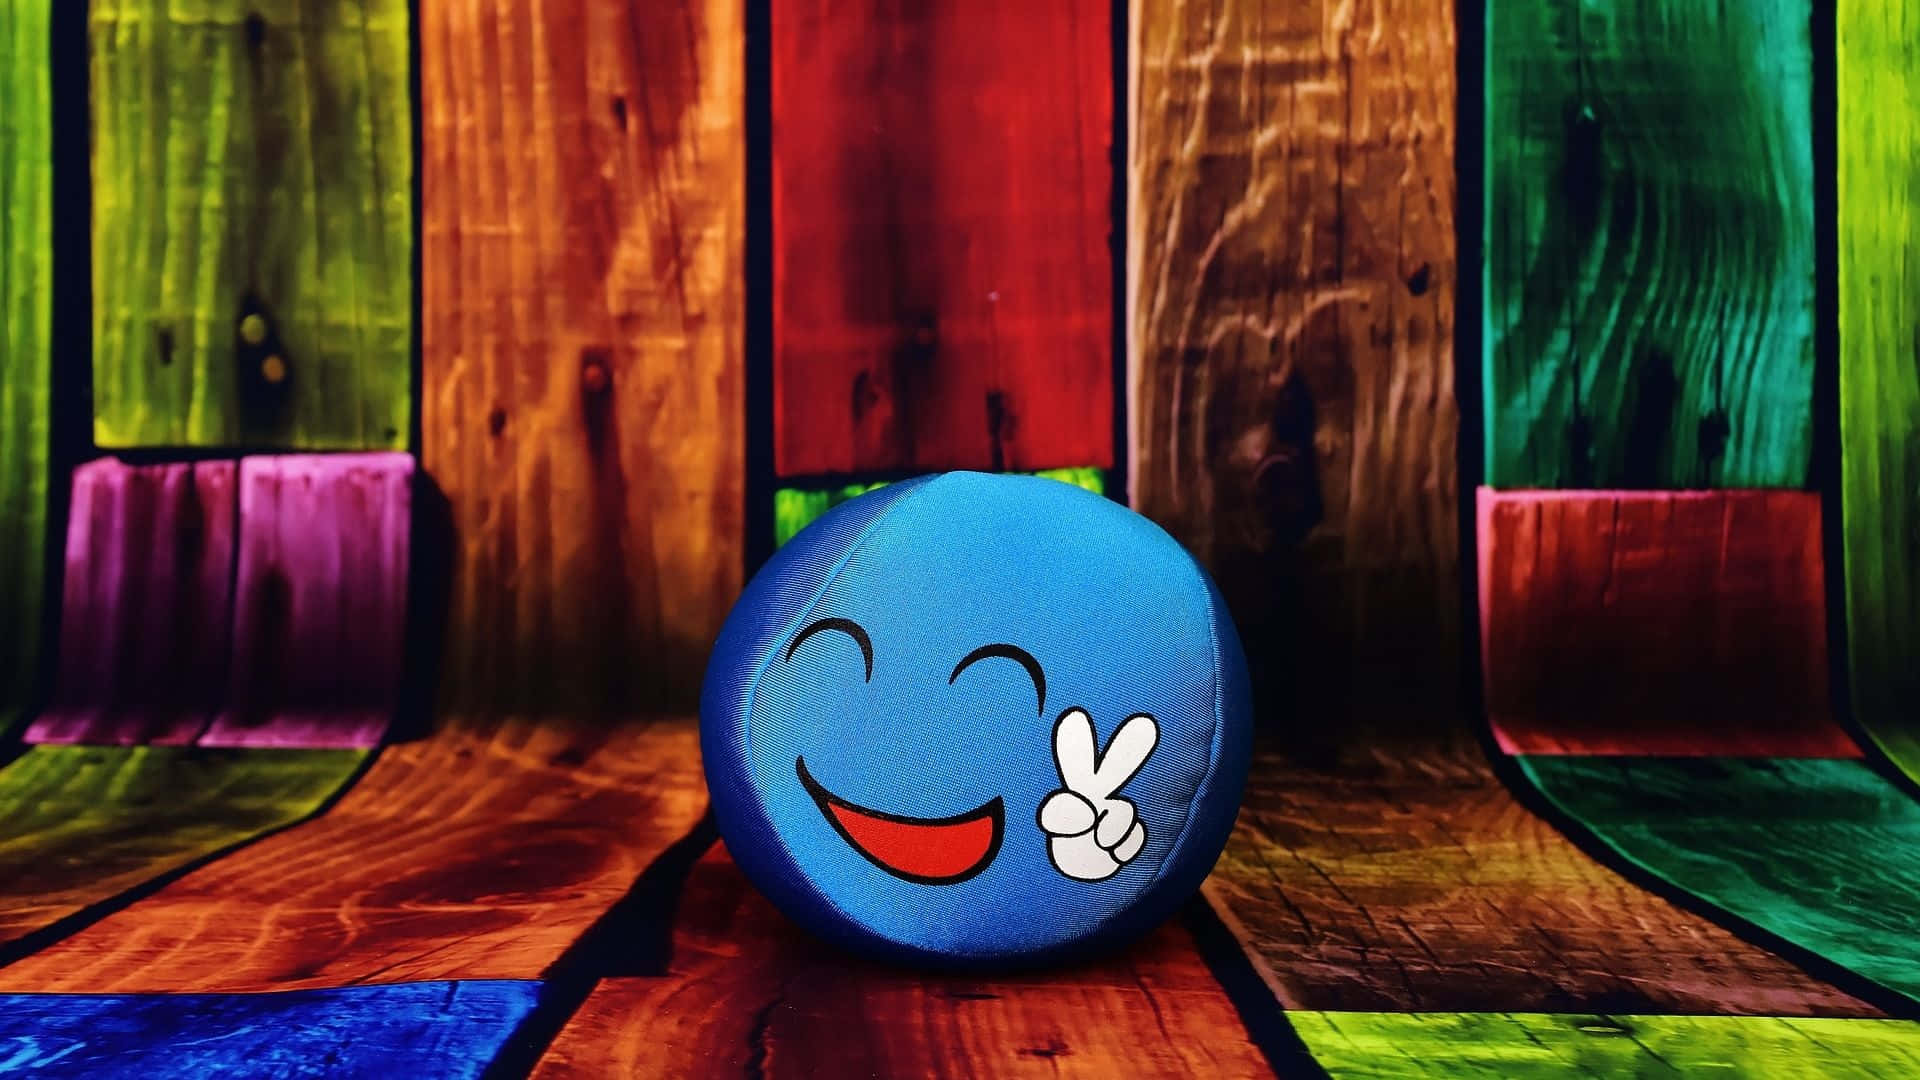 Colorful Smiley Faceon Wooden Background Wallpaper